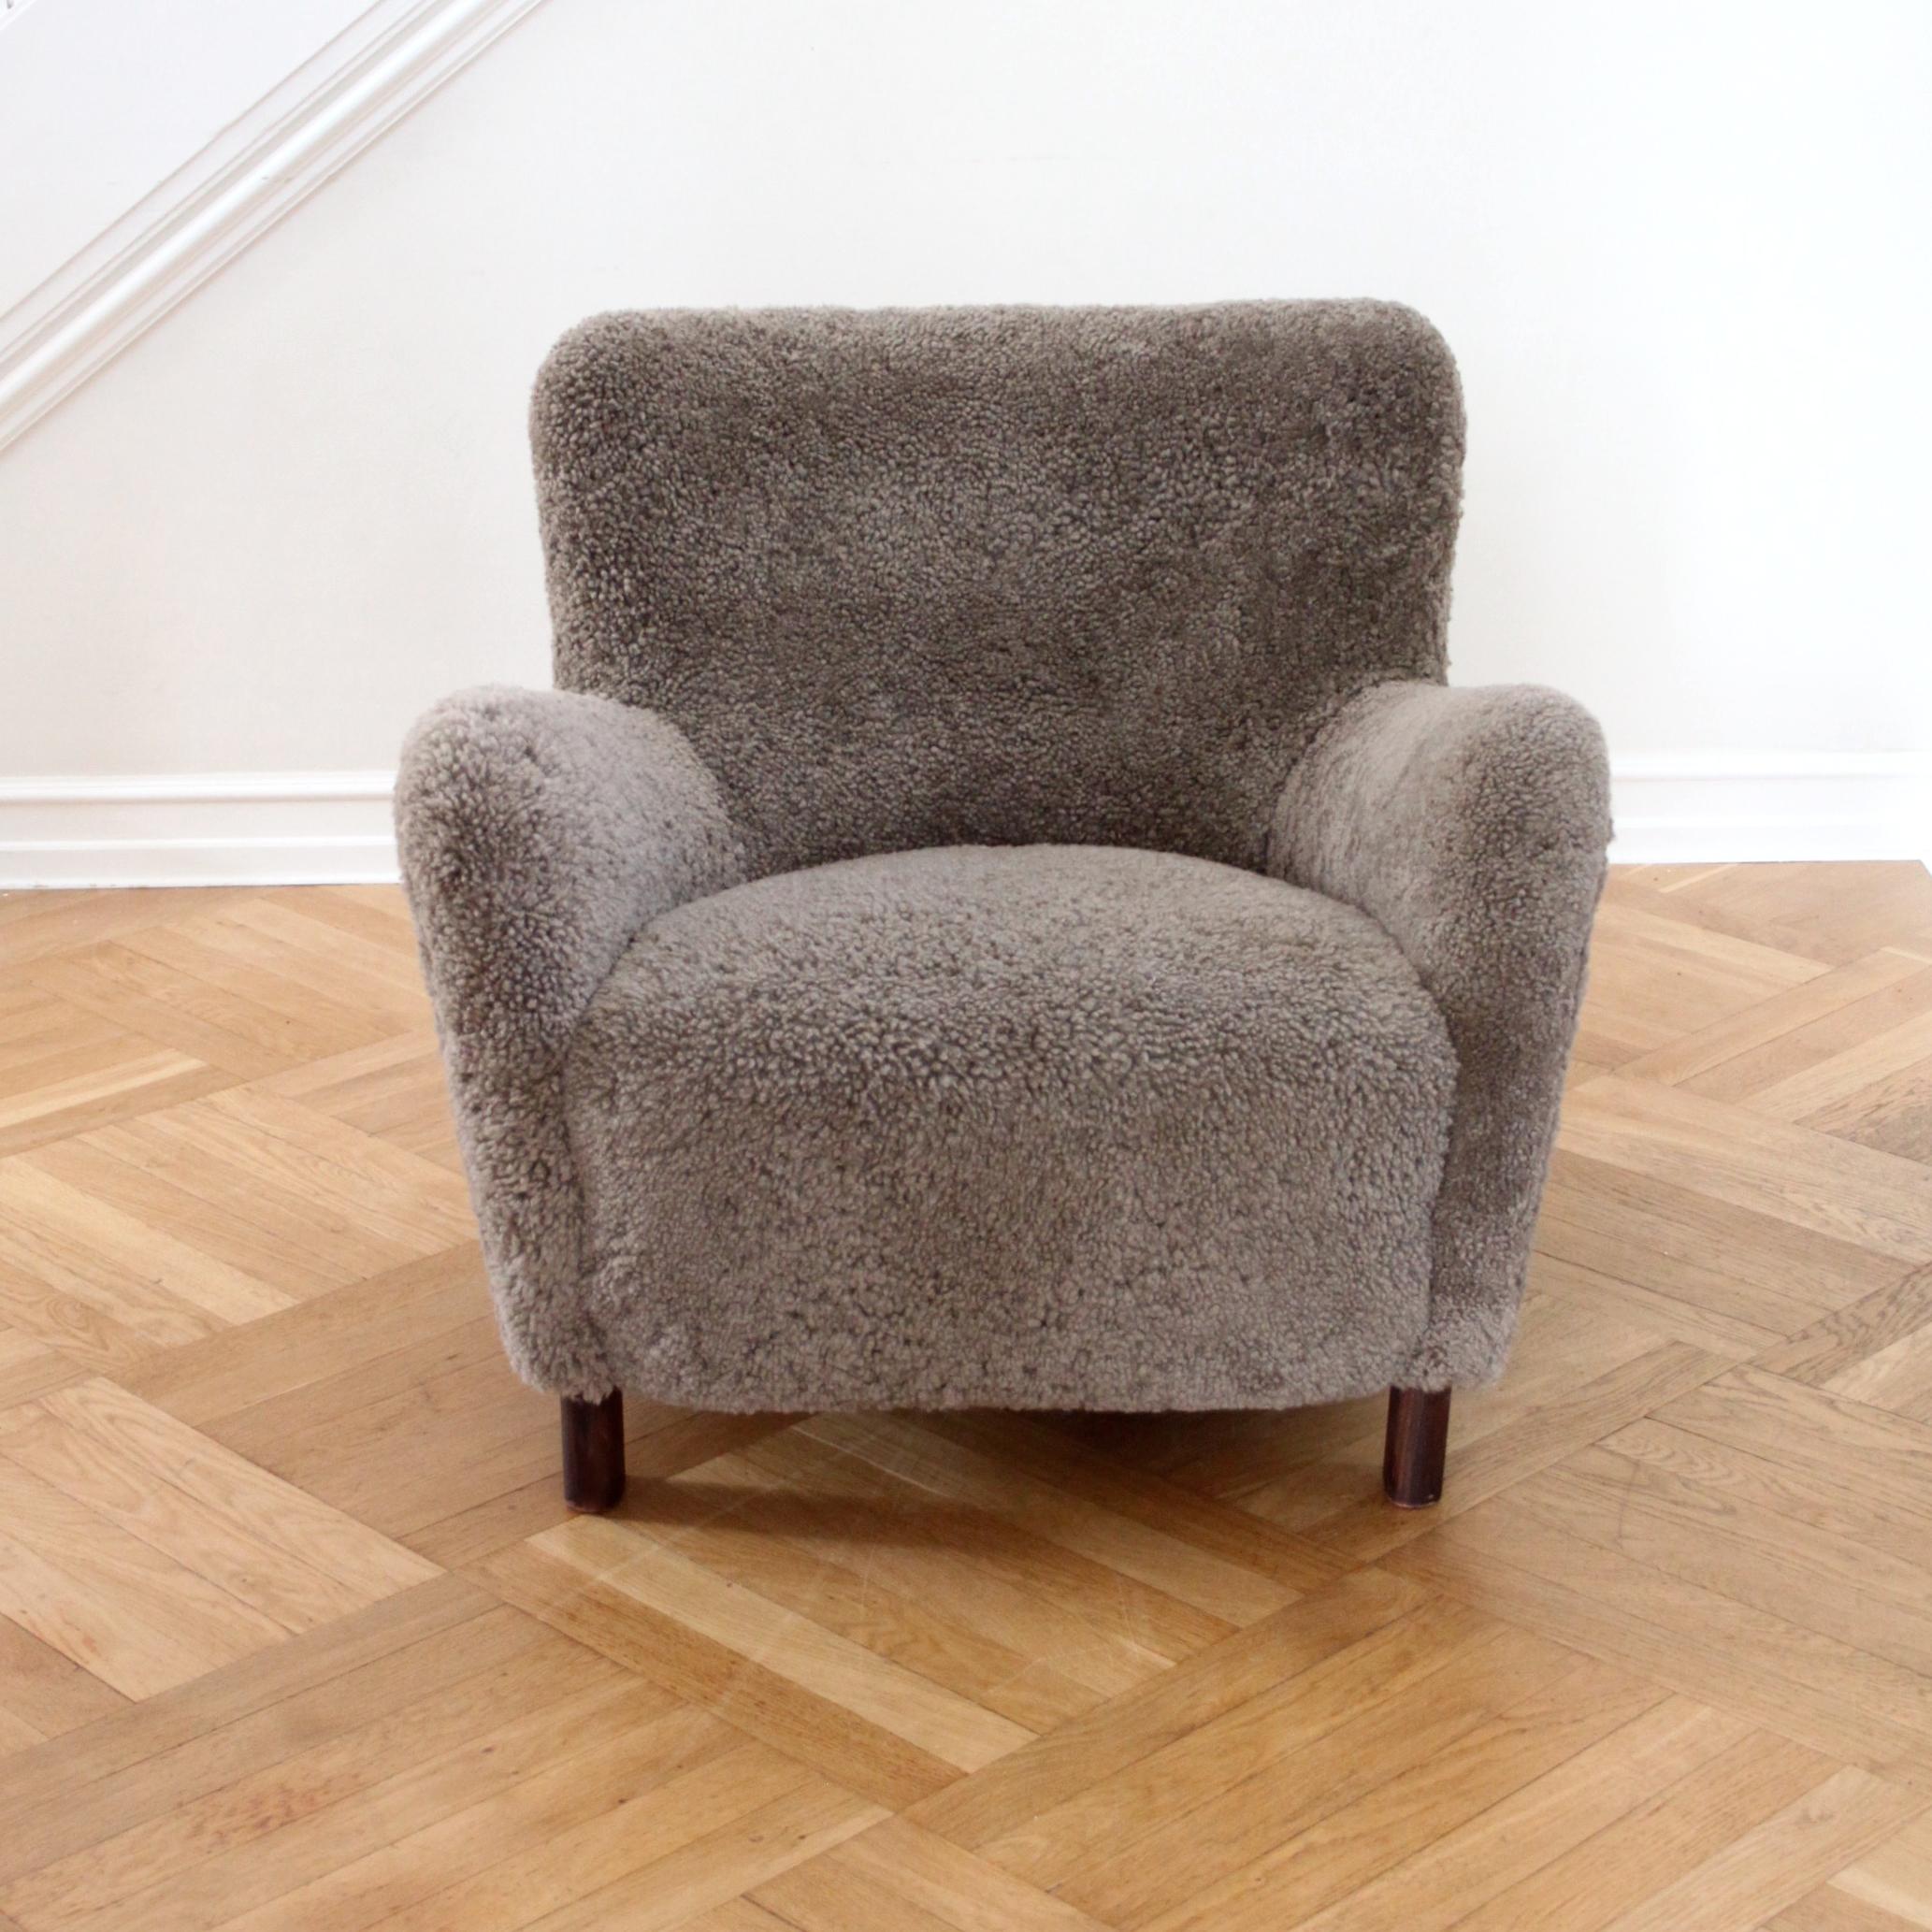 FRITZ HANSEN & MID-CENTURY MODERN

A beautiful Fritz Hansen easy chair, model 1669, 1930s.

Sculptural and comfortable armchair upholstered in brown sheepskin with cognac coloured buttons and legs of stained beech.

A beautiful decorative